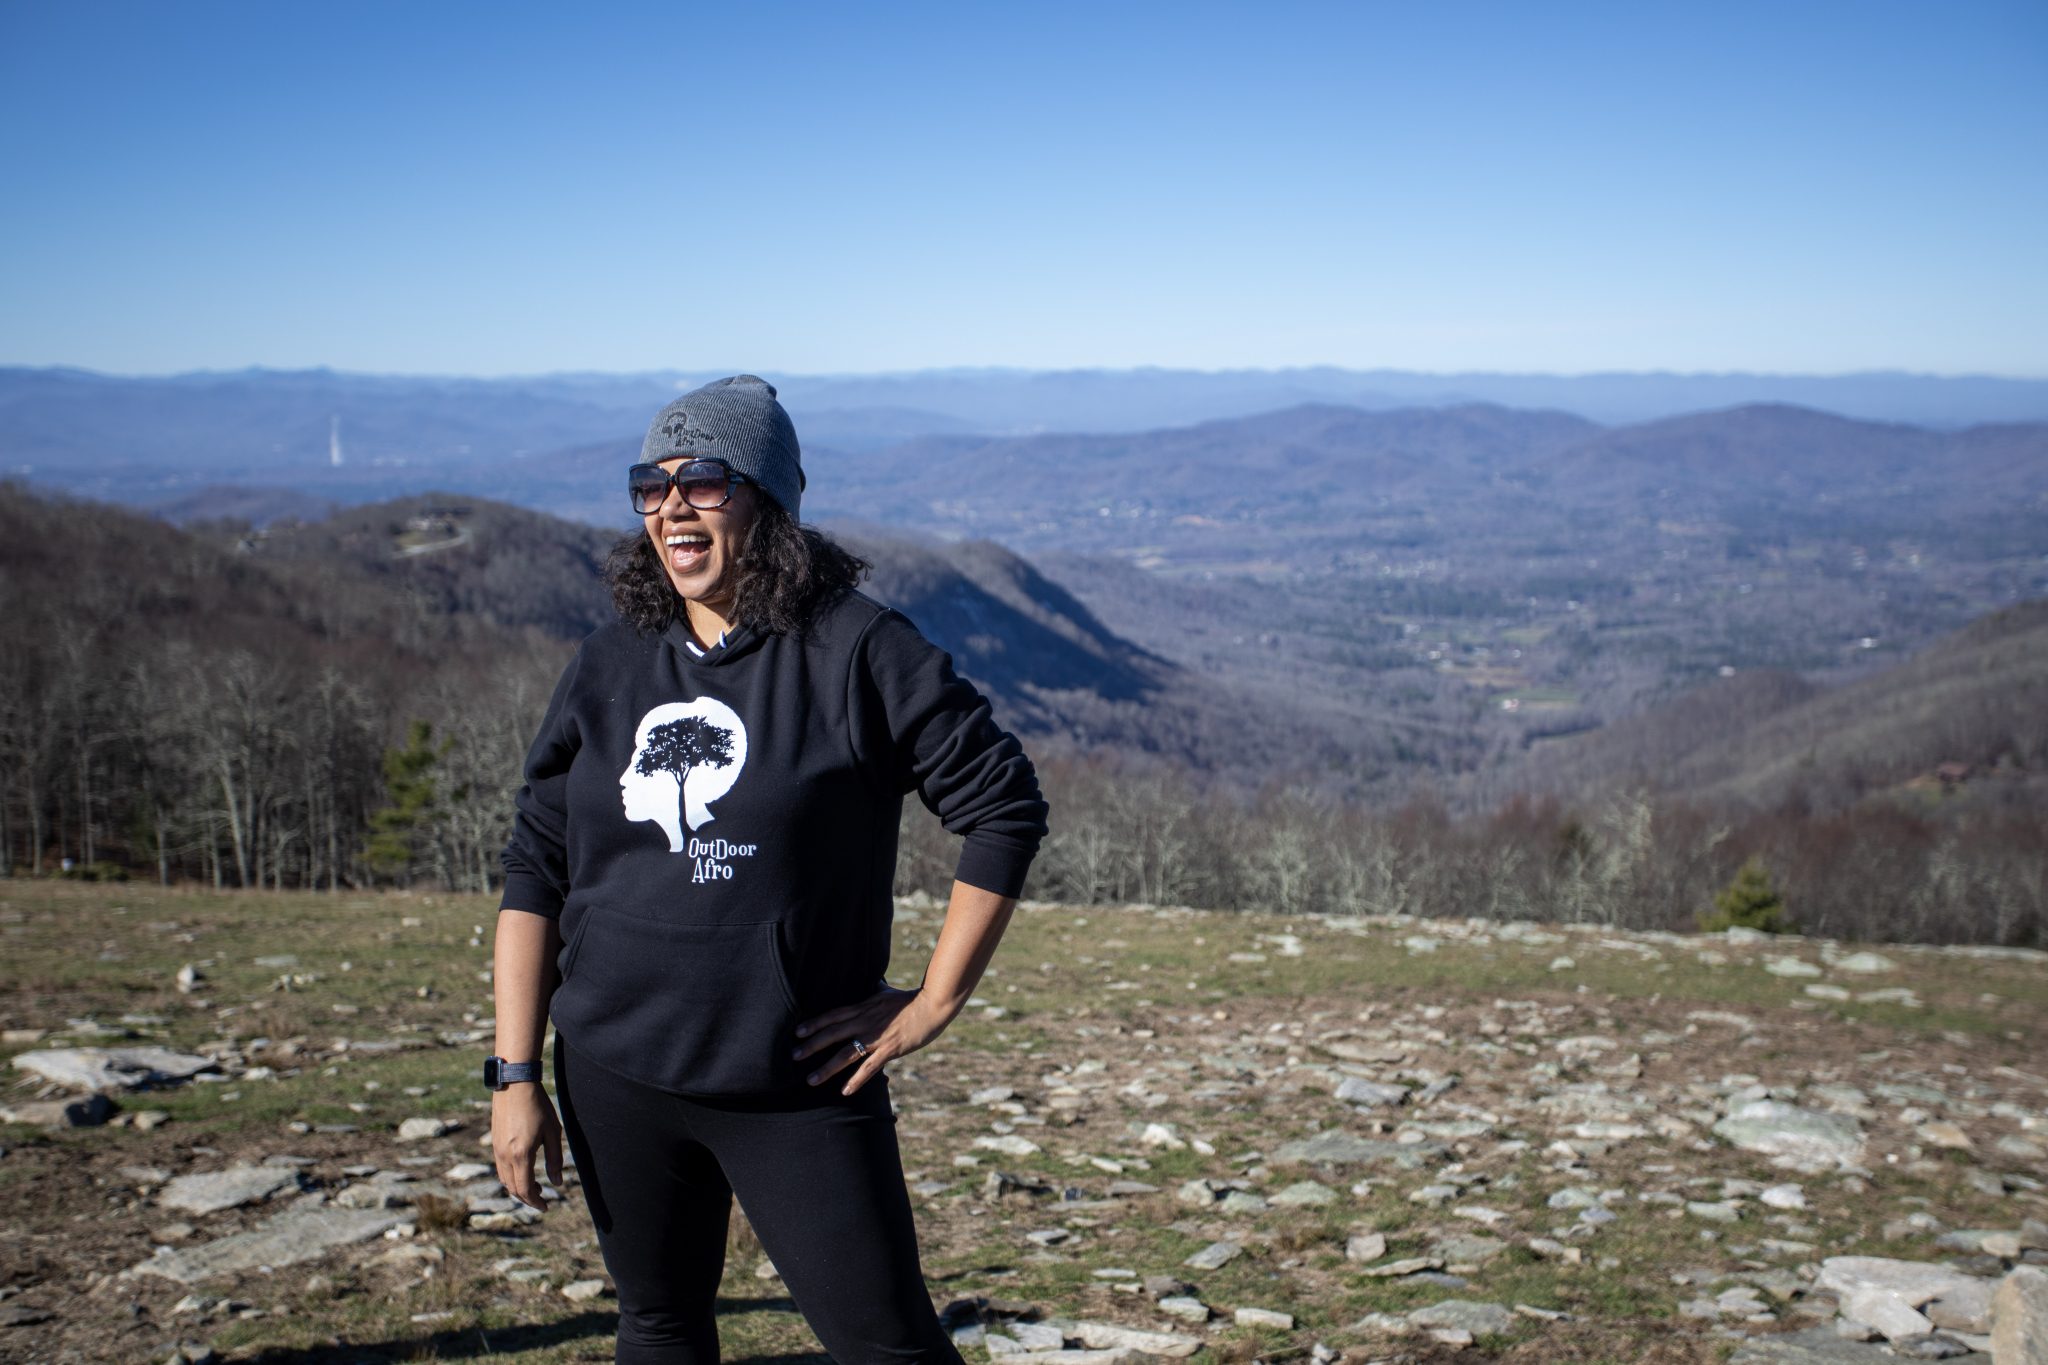 A woman stands on a hilltop smiling wearing her custom Outdoor Afro sweatshirt with their logo that shows the silhouette of a person's head with a tree growing where the brain would be.